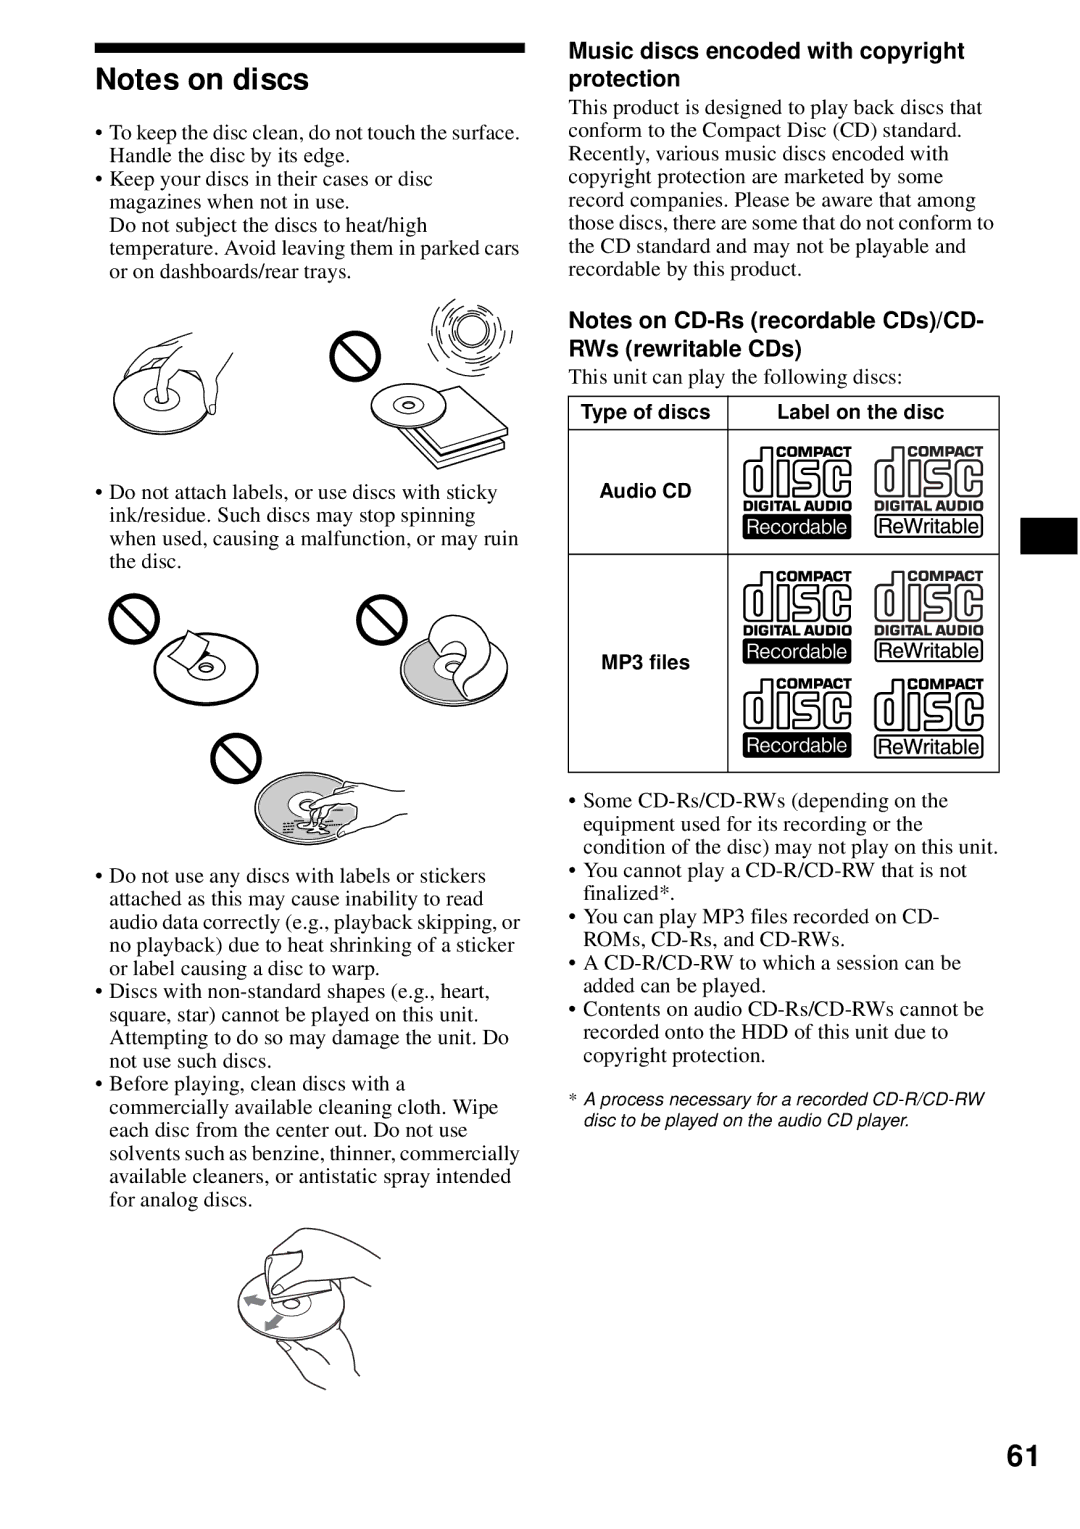 Sony MEX-1HD operating instructions Music discs encoded with copyright protection, Label on the disc, MP3 files 